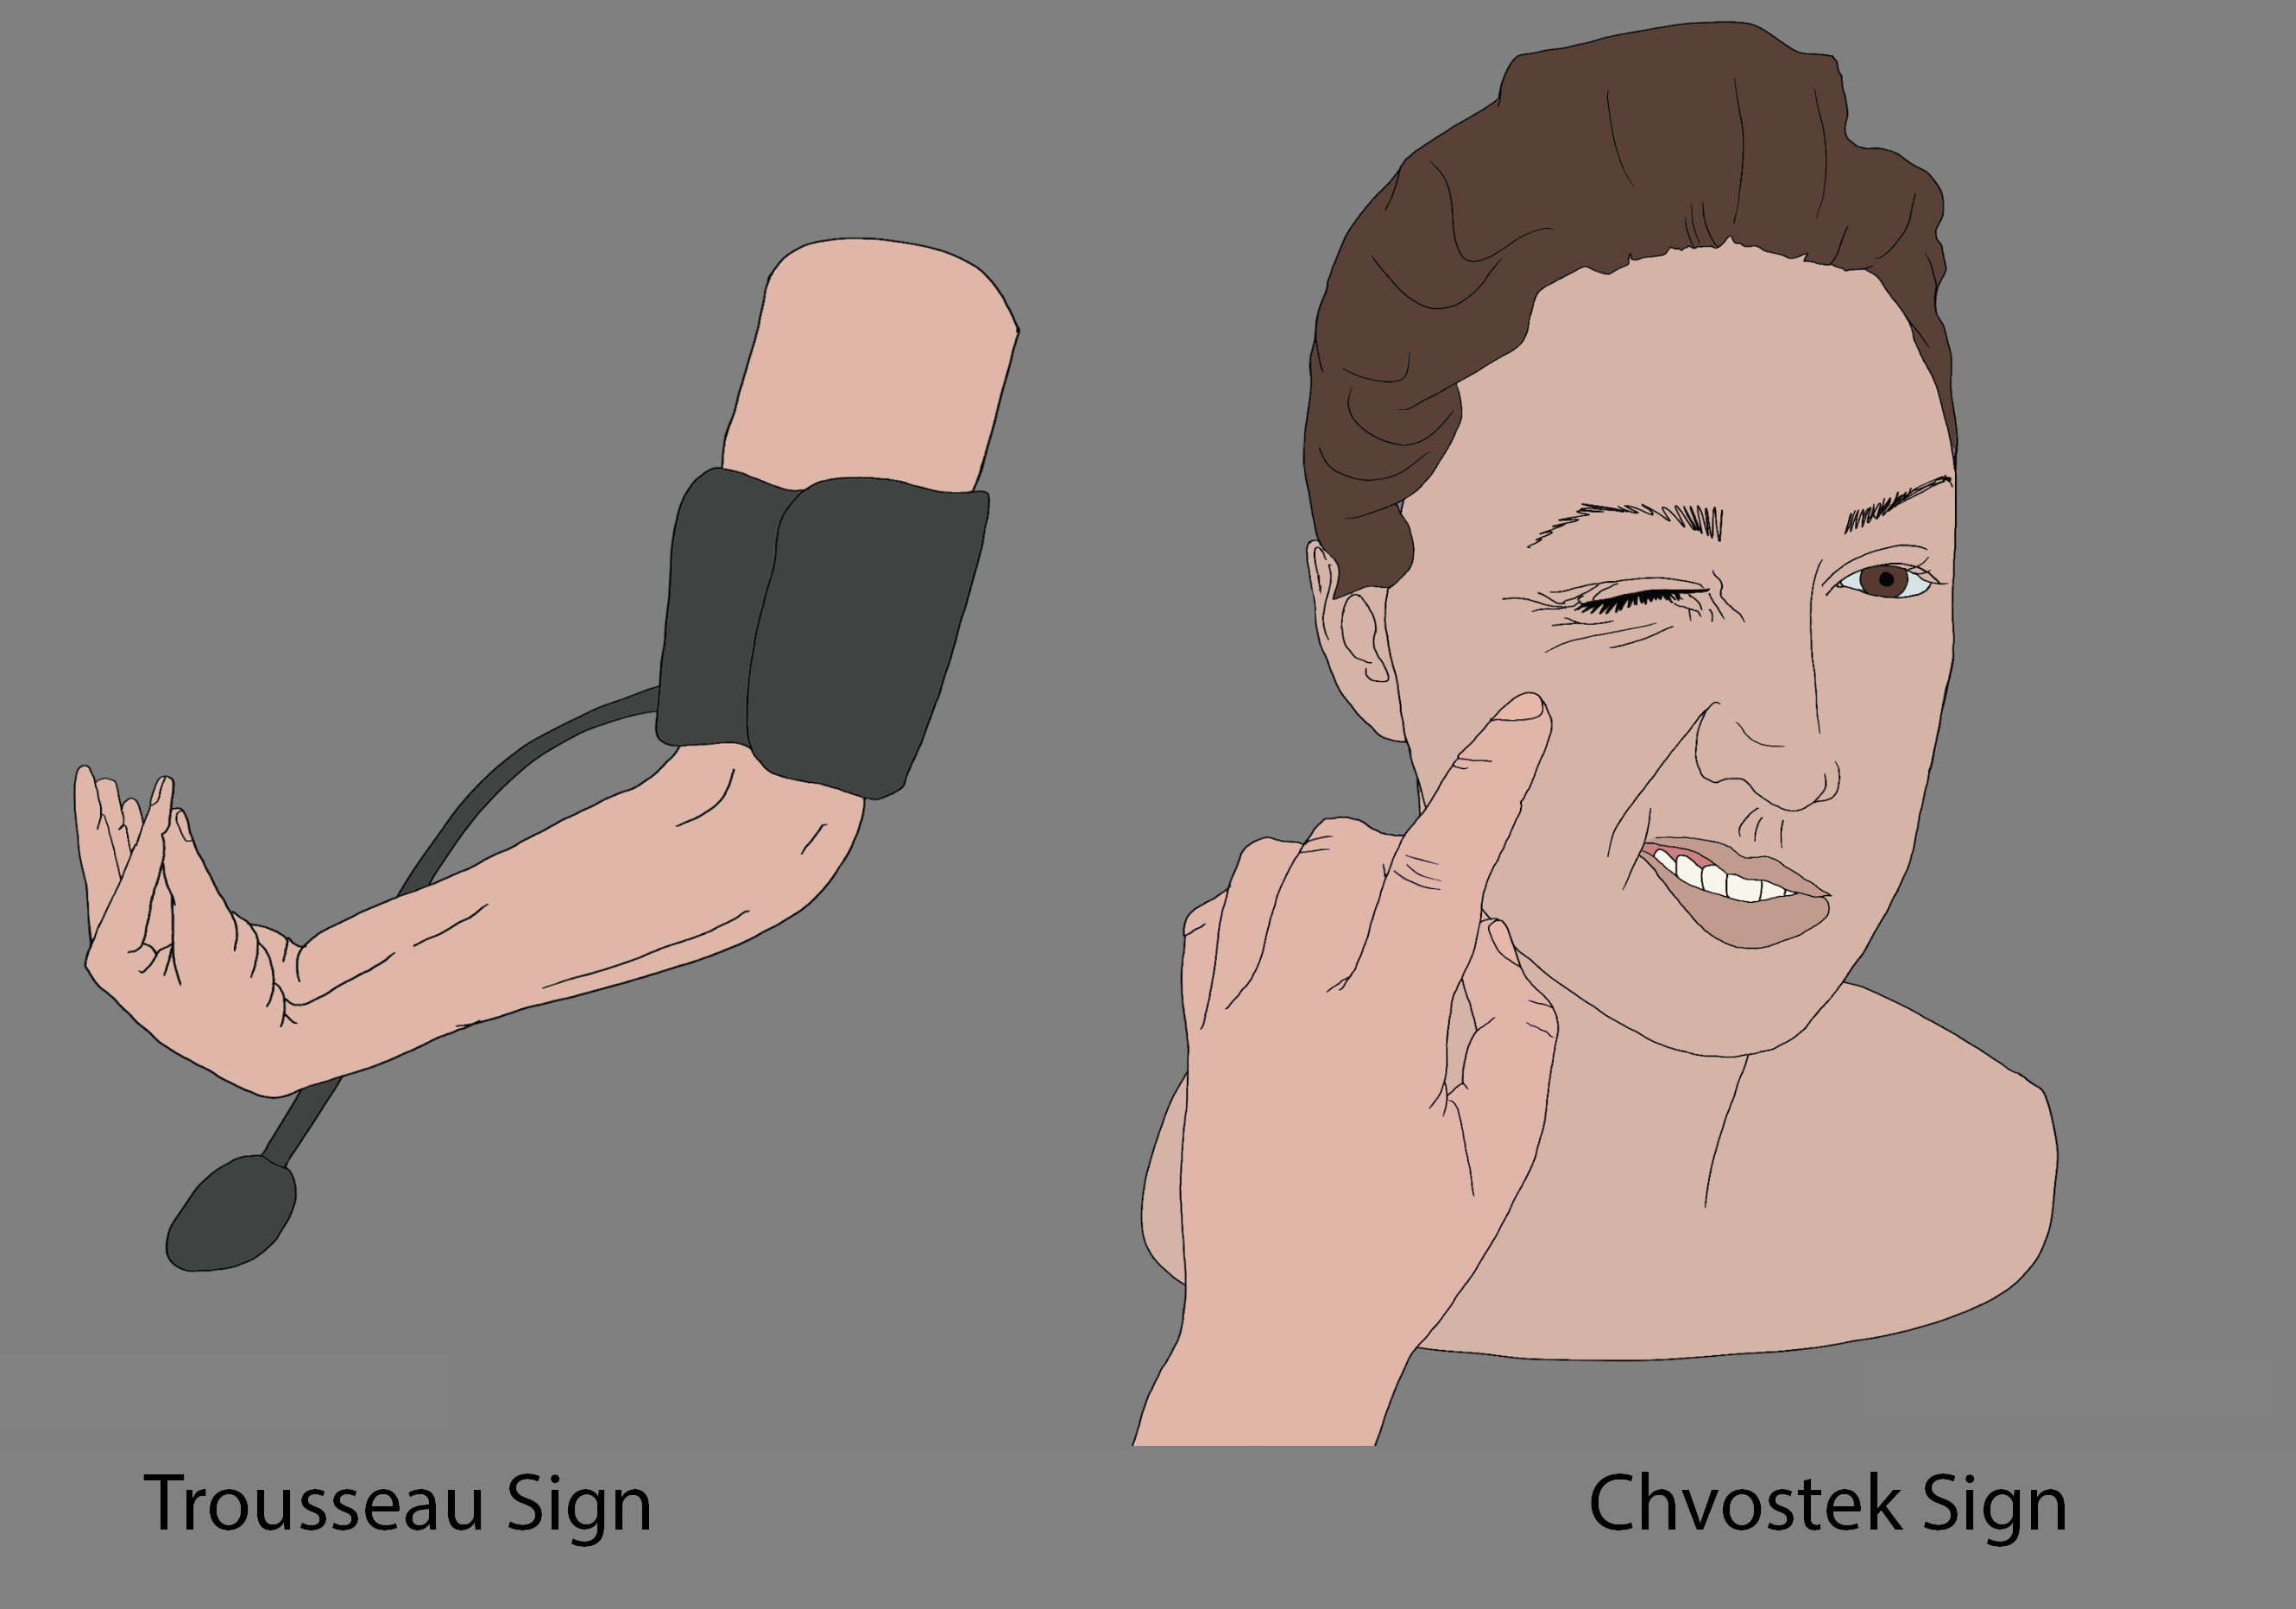 Diagram of finger tapping eliciting Chvostek and blood pressure cuff eliciting Trousseau sign.